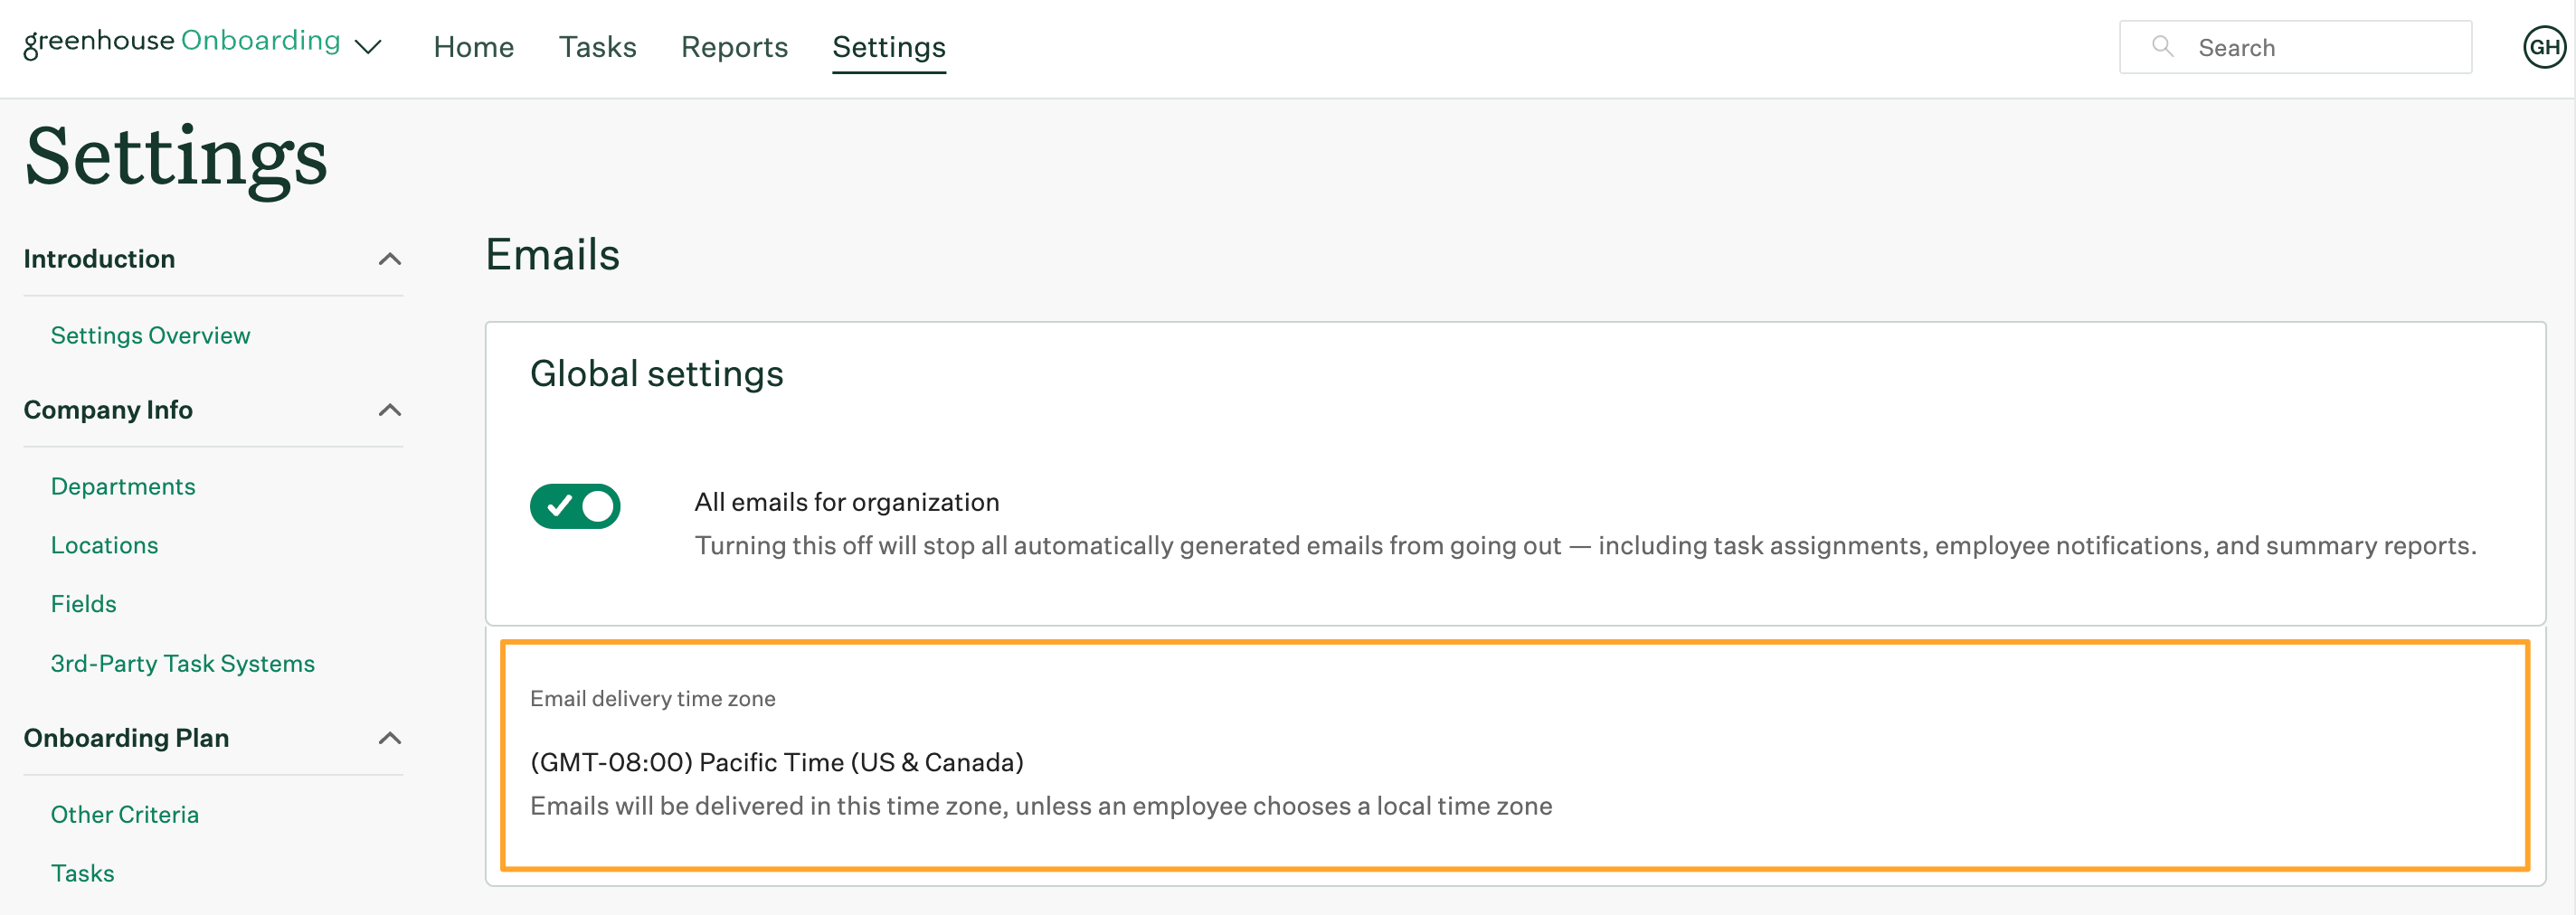 Screenshot of email settings page with email delivery time zone section highlighted